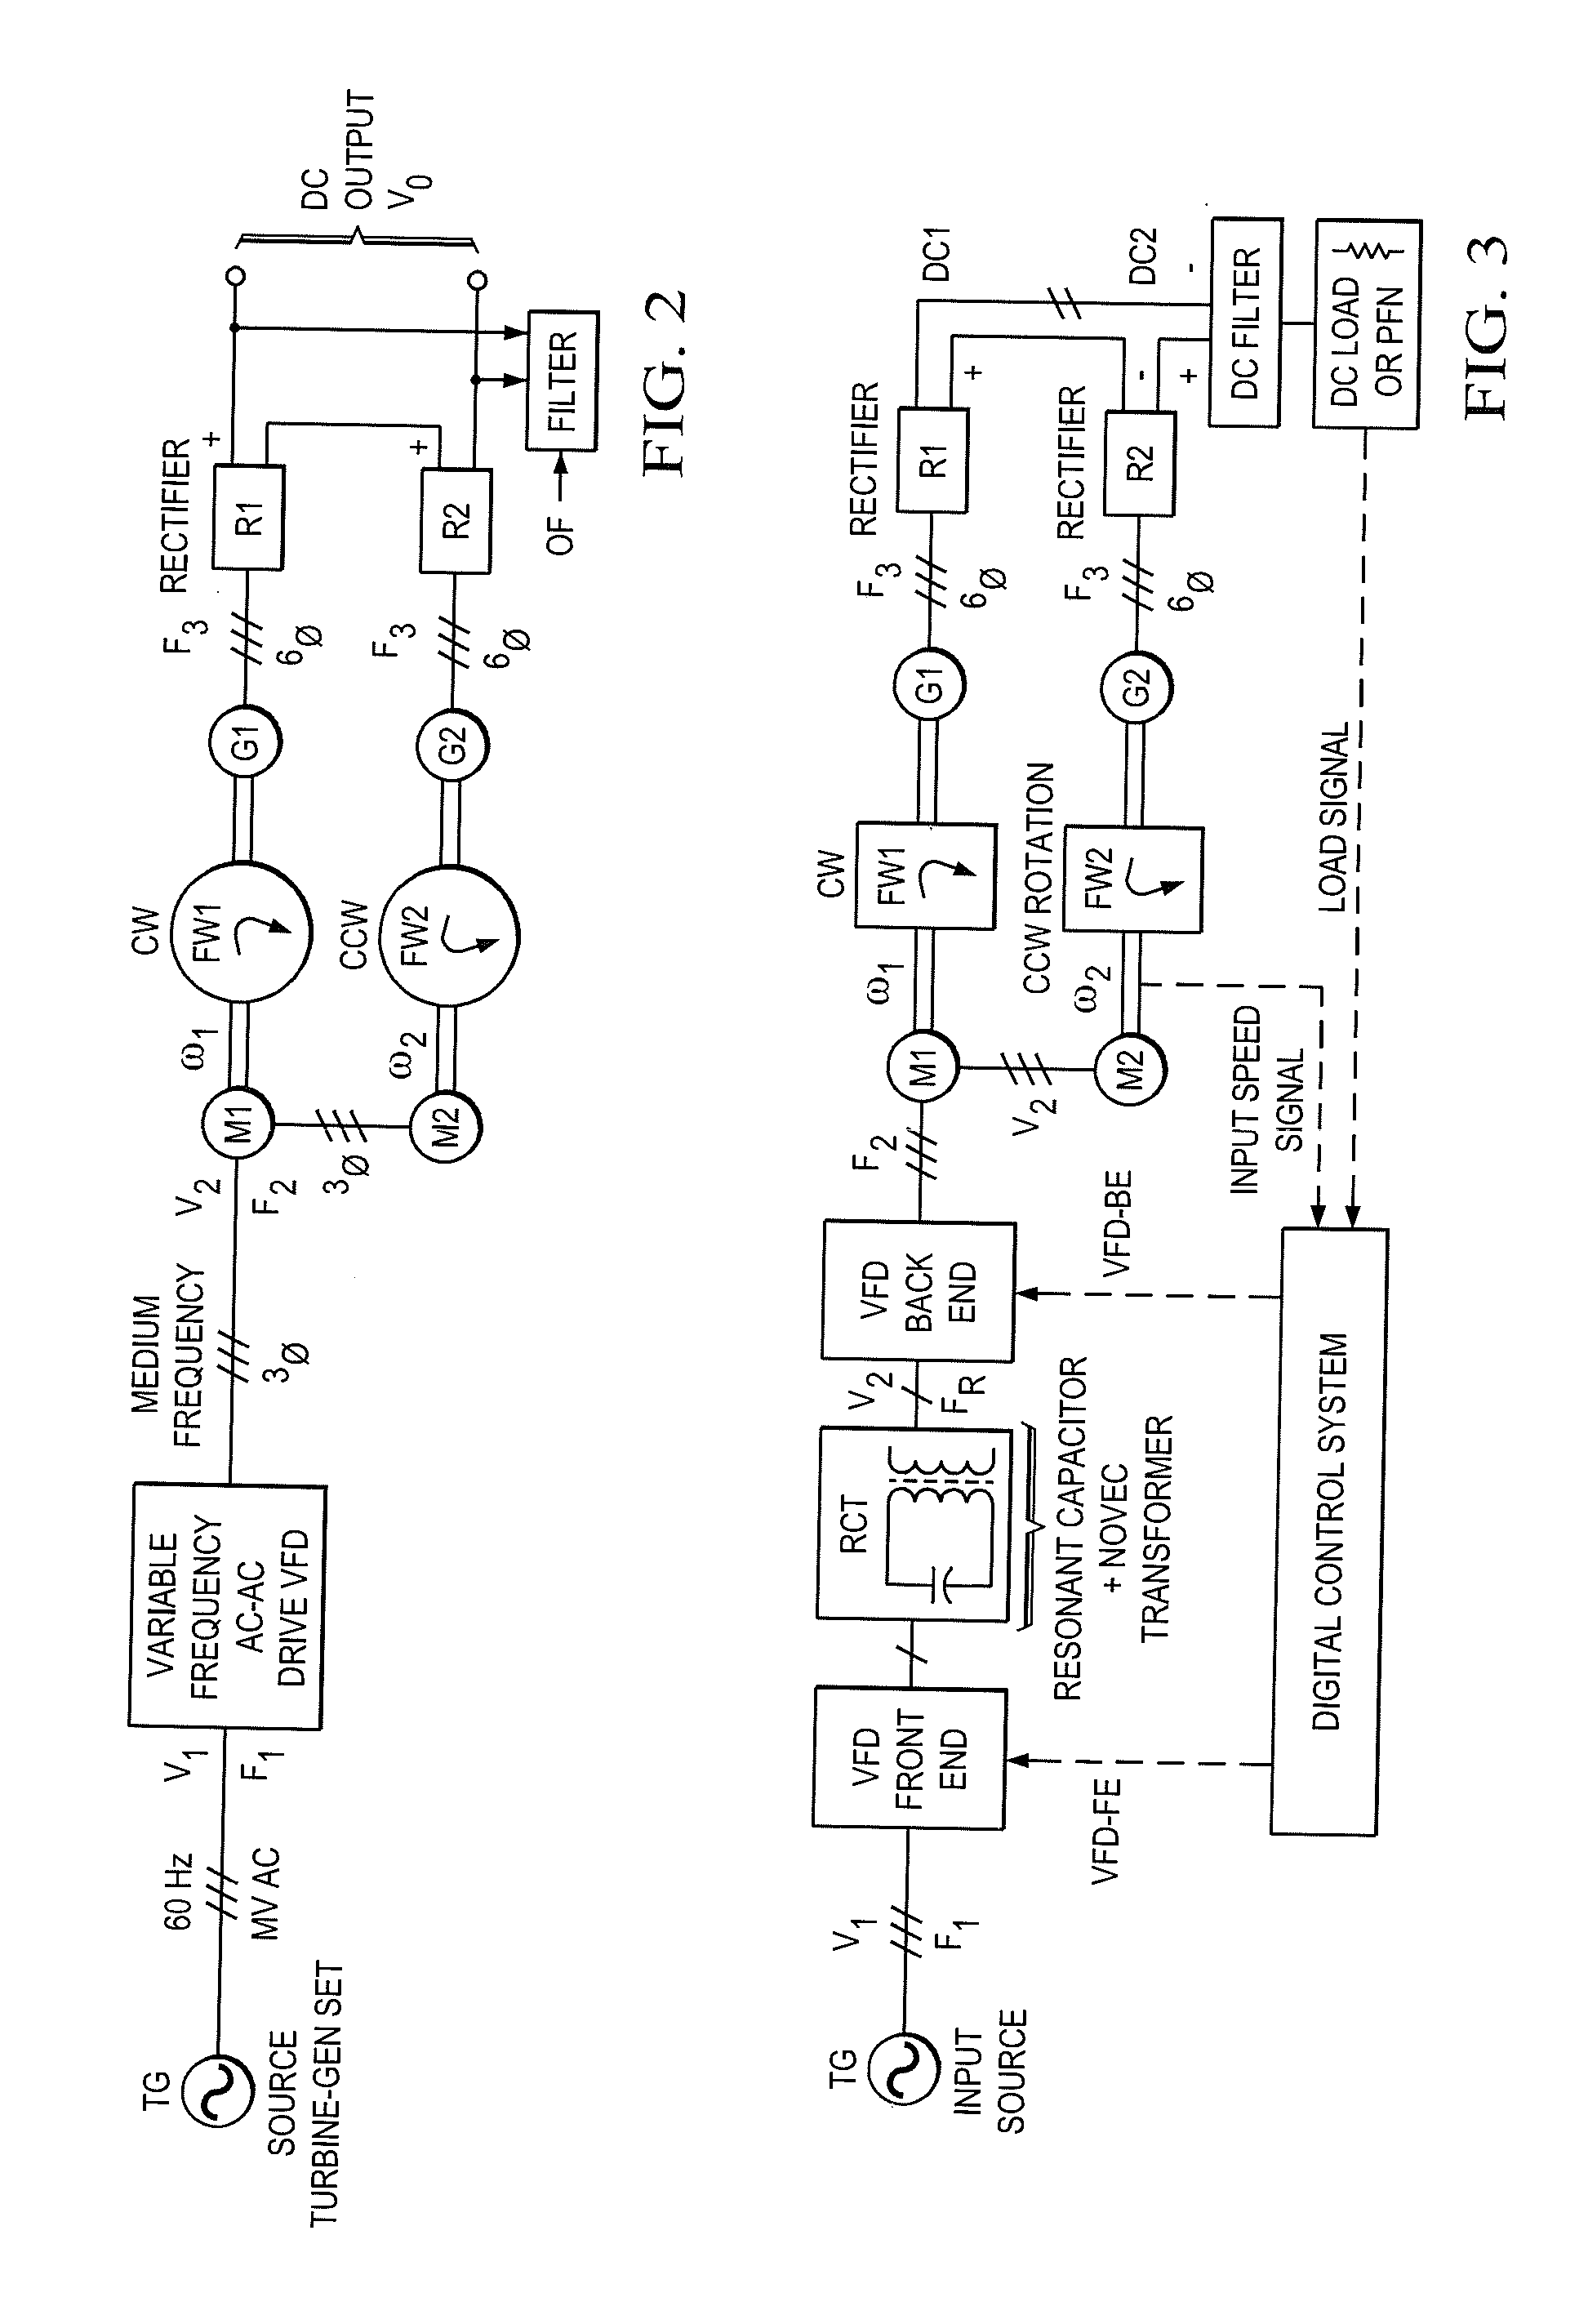 Inertial energy storage system and hydro-fluoro-ether power transformer scheme for radar power systems and large pfn charging